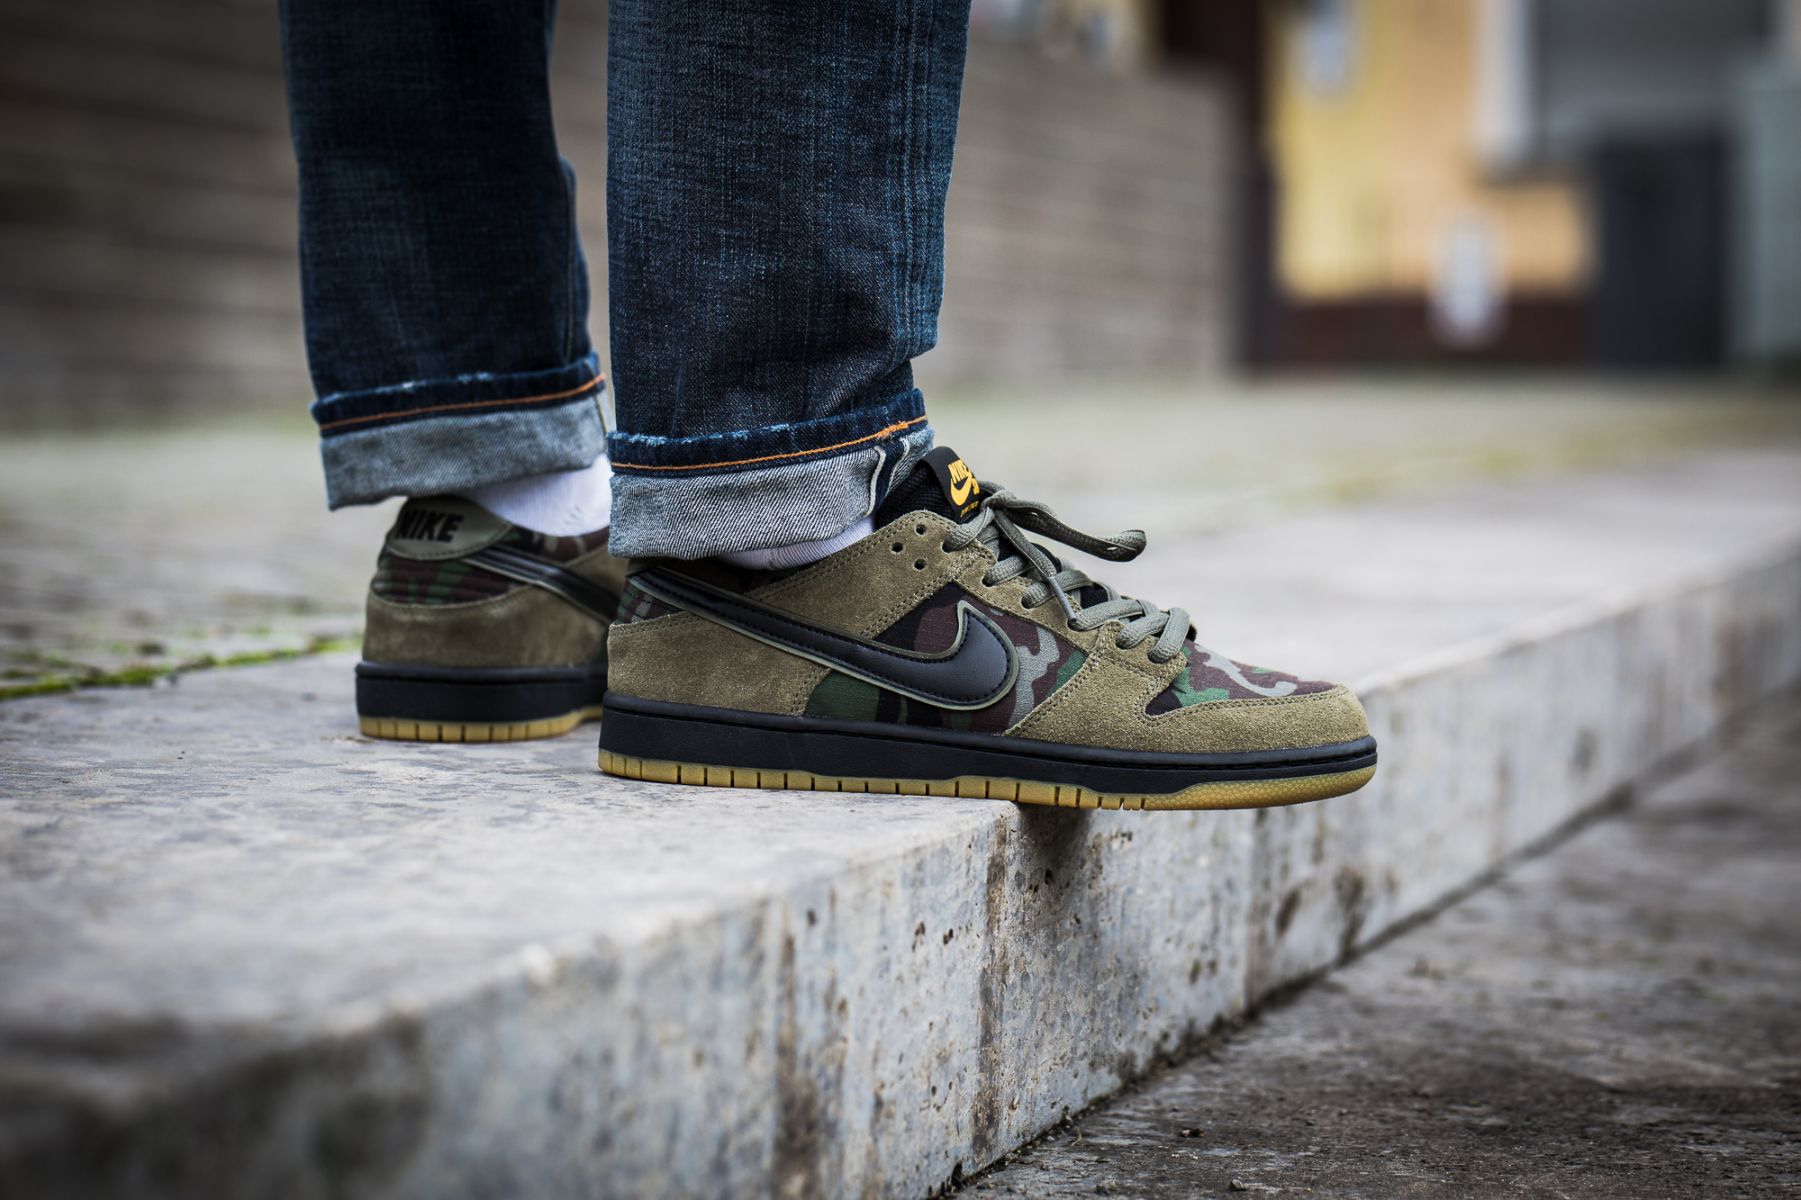 The Sole Supplier on Twitter: "Nike Zoom Low Camo launched yesterday across &amp; European stockists https://t.co/dq1qd0nDNn https://t.co/jpbyUom7u9" / Twitter